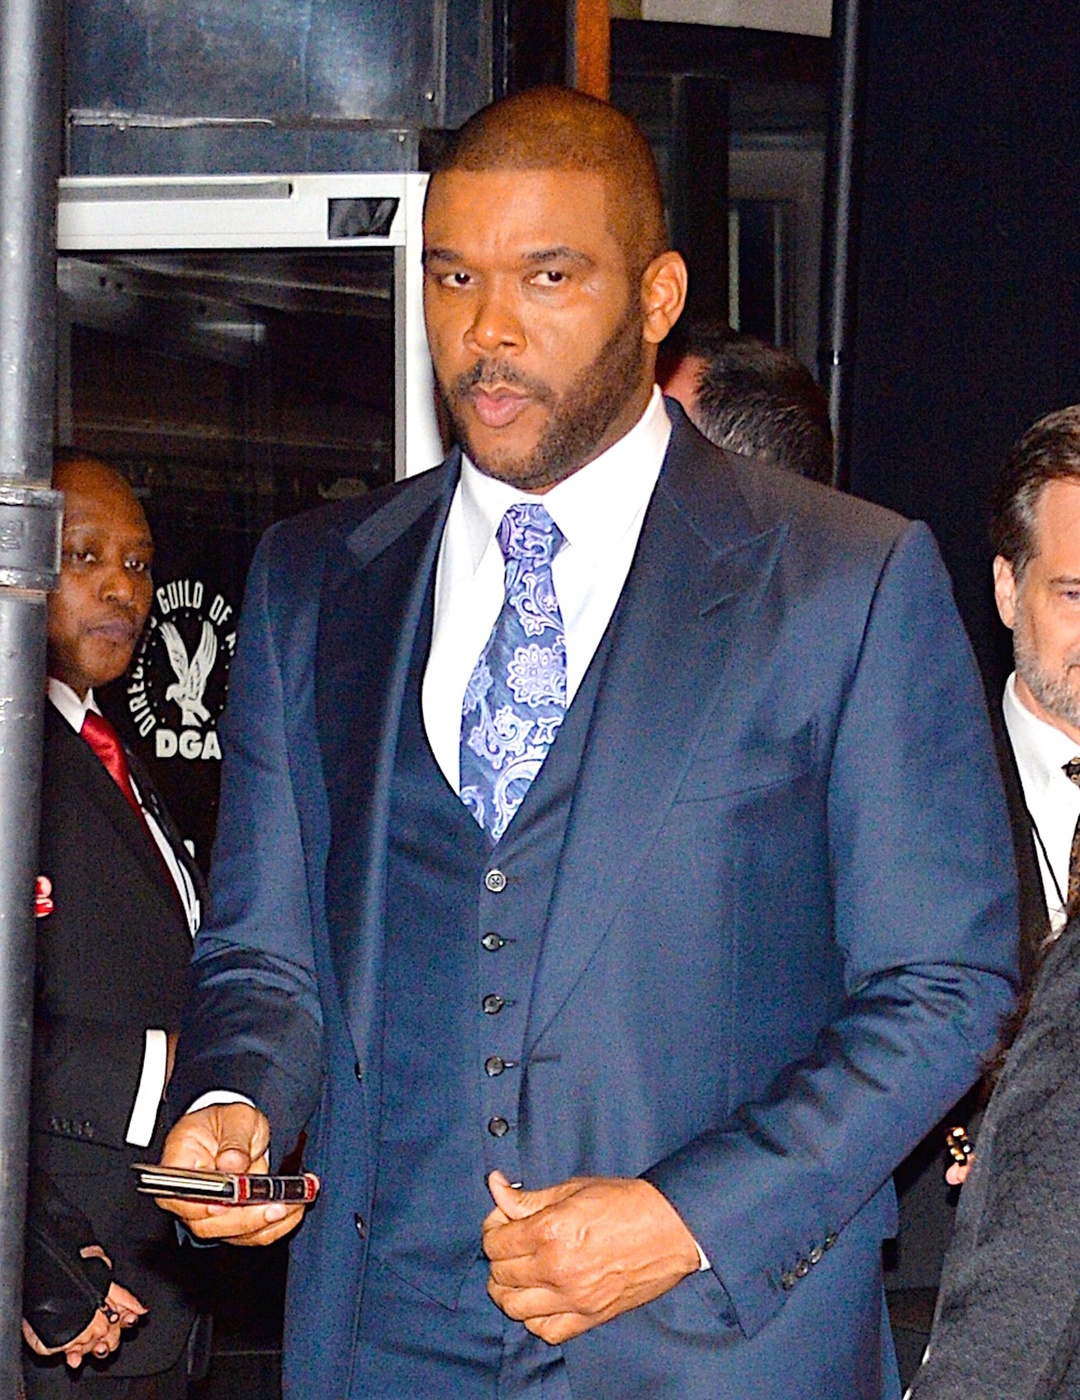 143785, Tyler Perry at the DGA Honors 2015 Gala event in NYC. New York, New York - Thursday October 15, 2015. Photograph: © PacificCoastNews. Los Angeles Office: +1 310.822.0419 sales@pacificcoastnews.com FEE MUST BE AGREED PRIOR TO USAGE